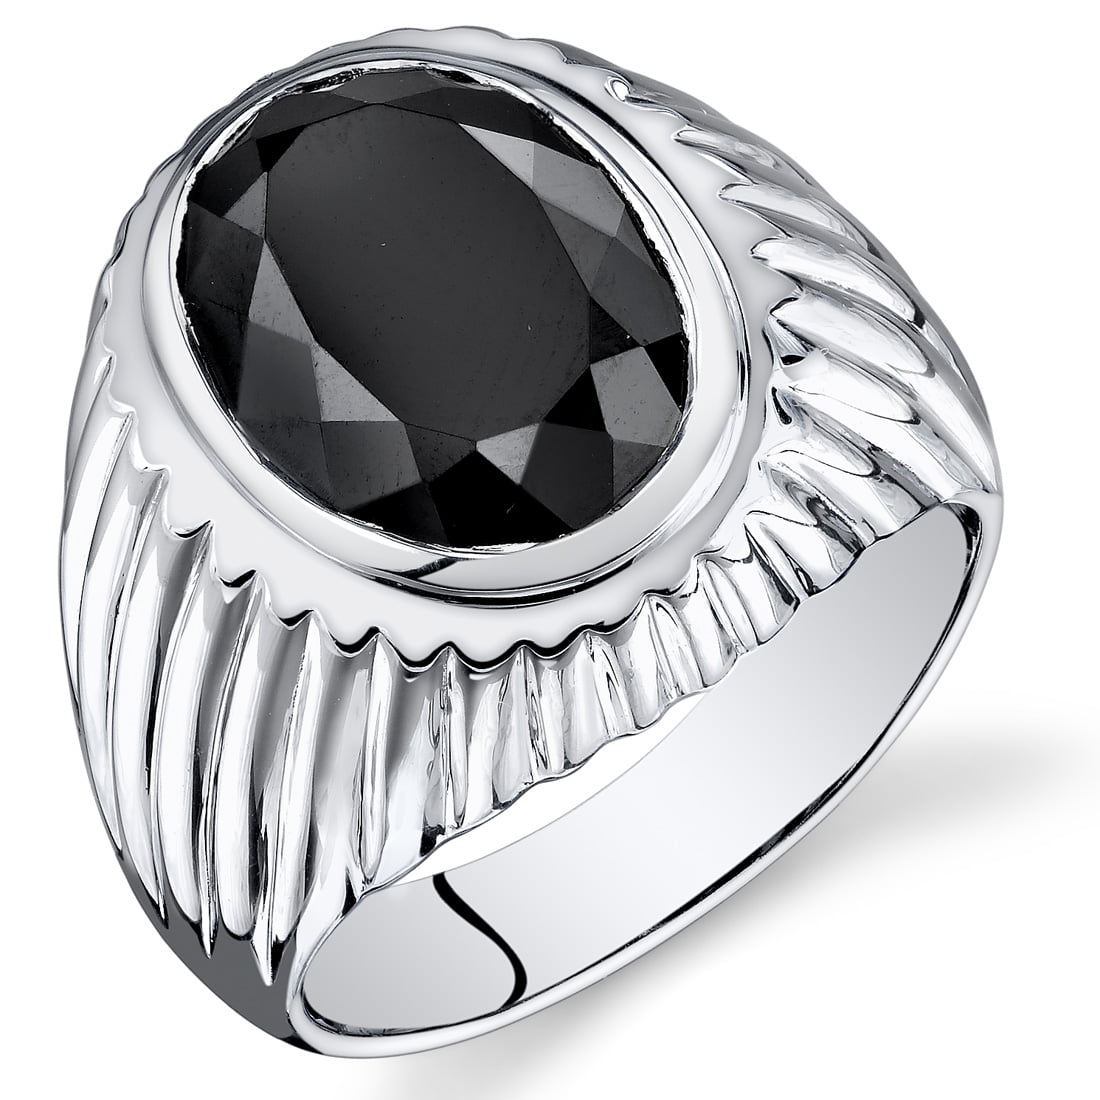 Oval Ring Genuine Sterling Silver 925 Selectable Black Onyx Face Height 9 mm 